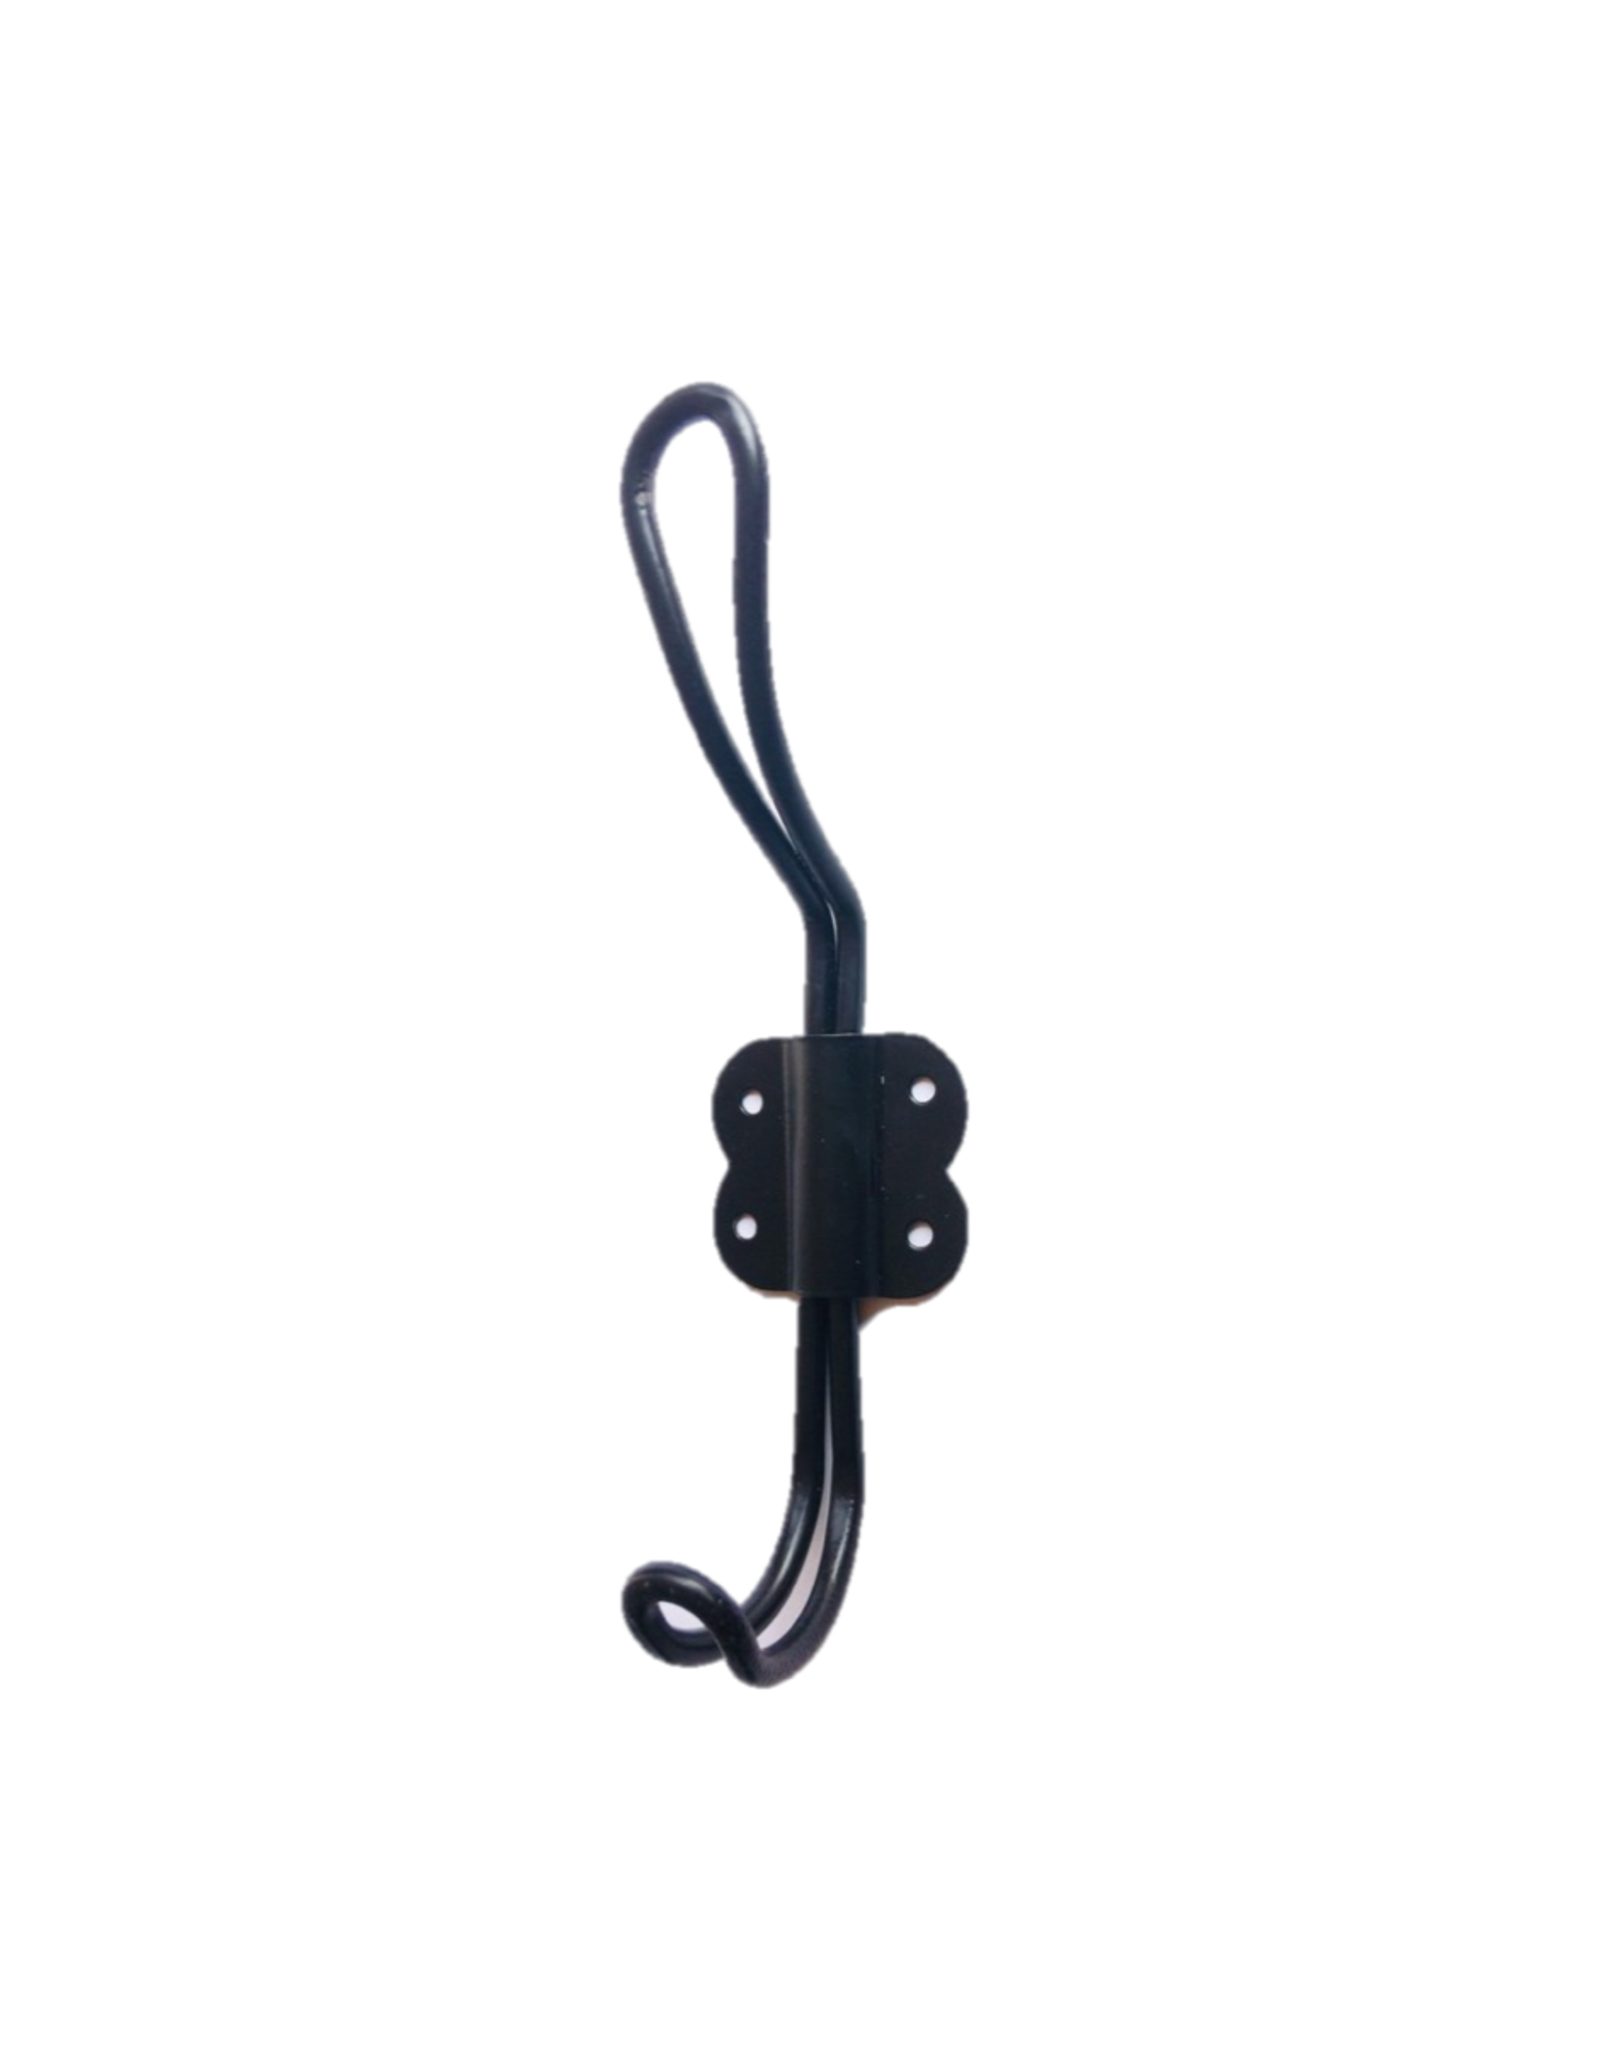 TIMCo NTH - Double Wall Hook / Hairpin, Black, 5.5"